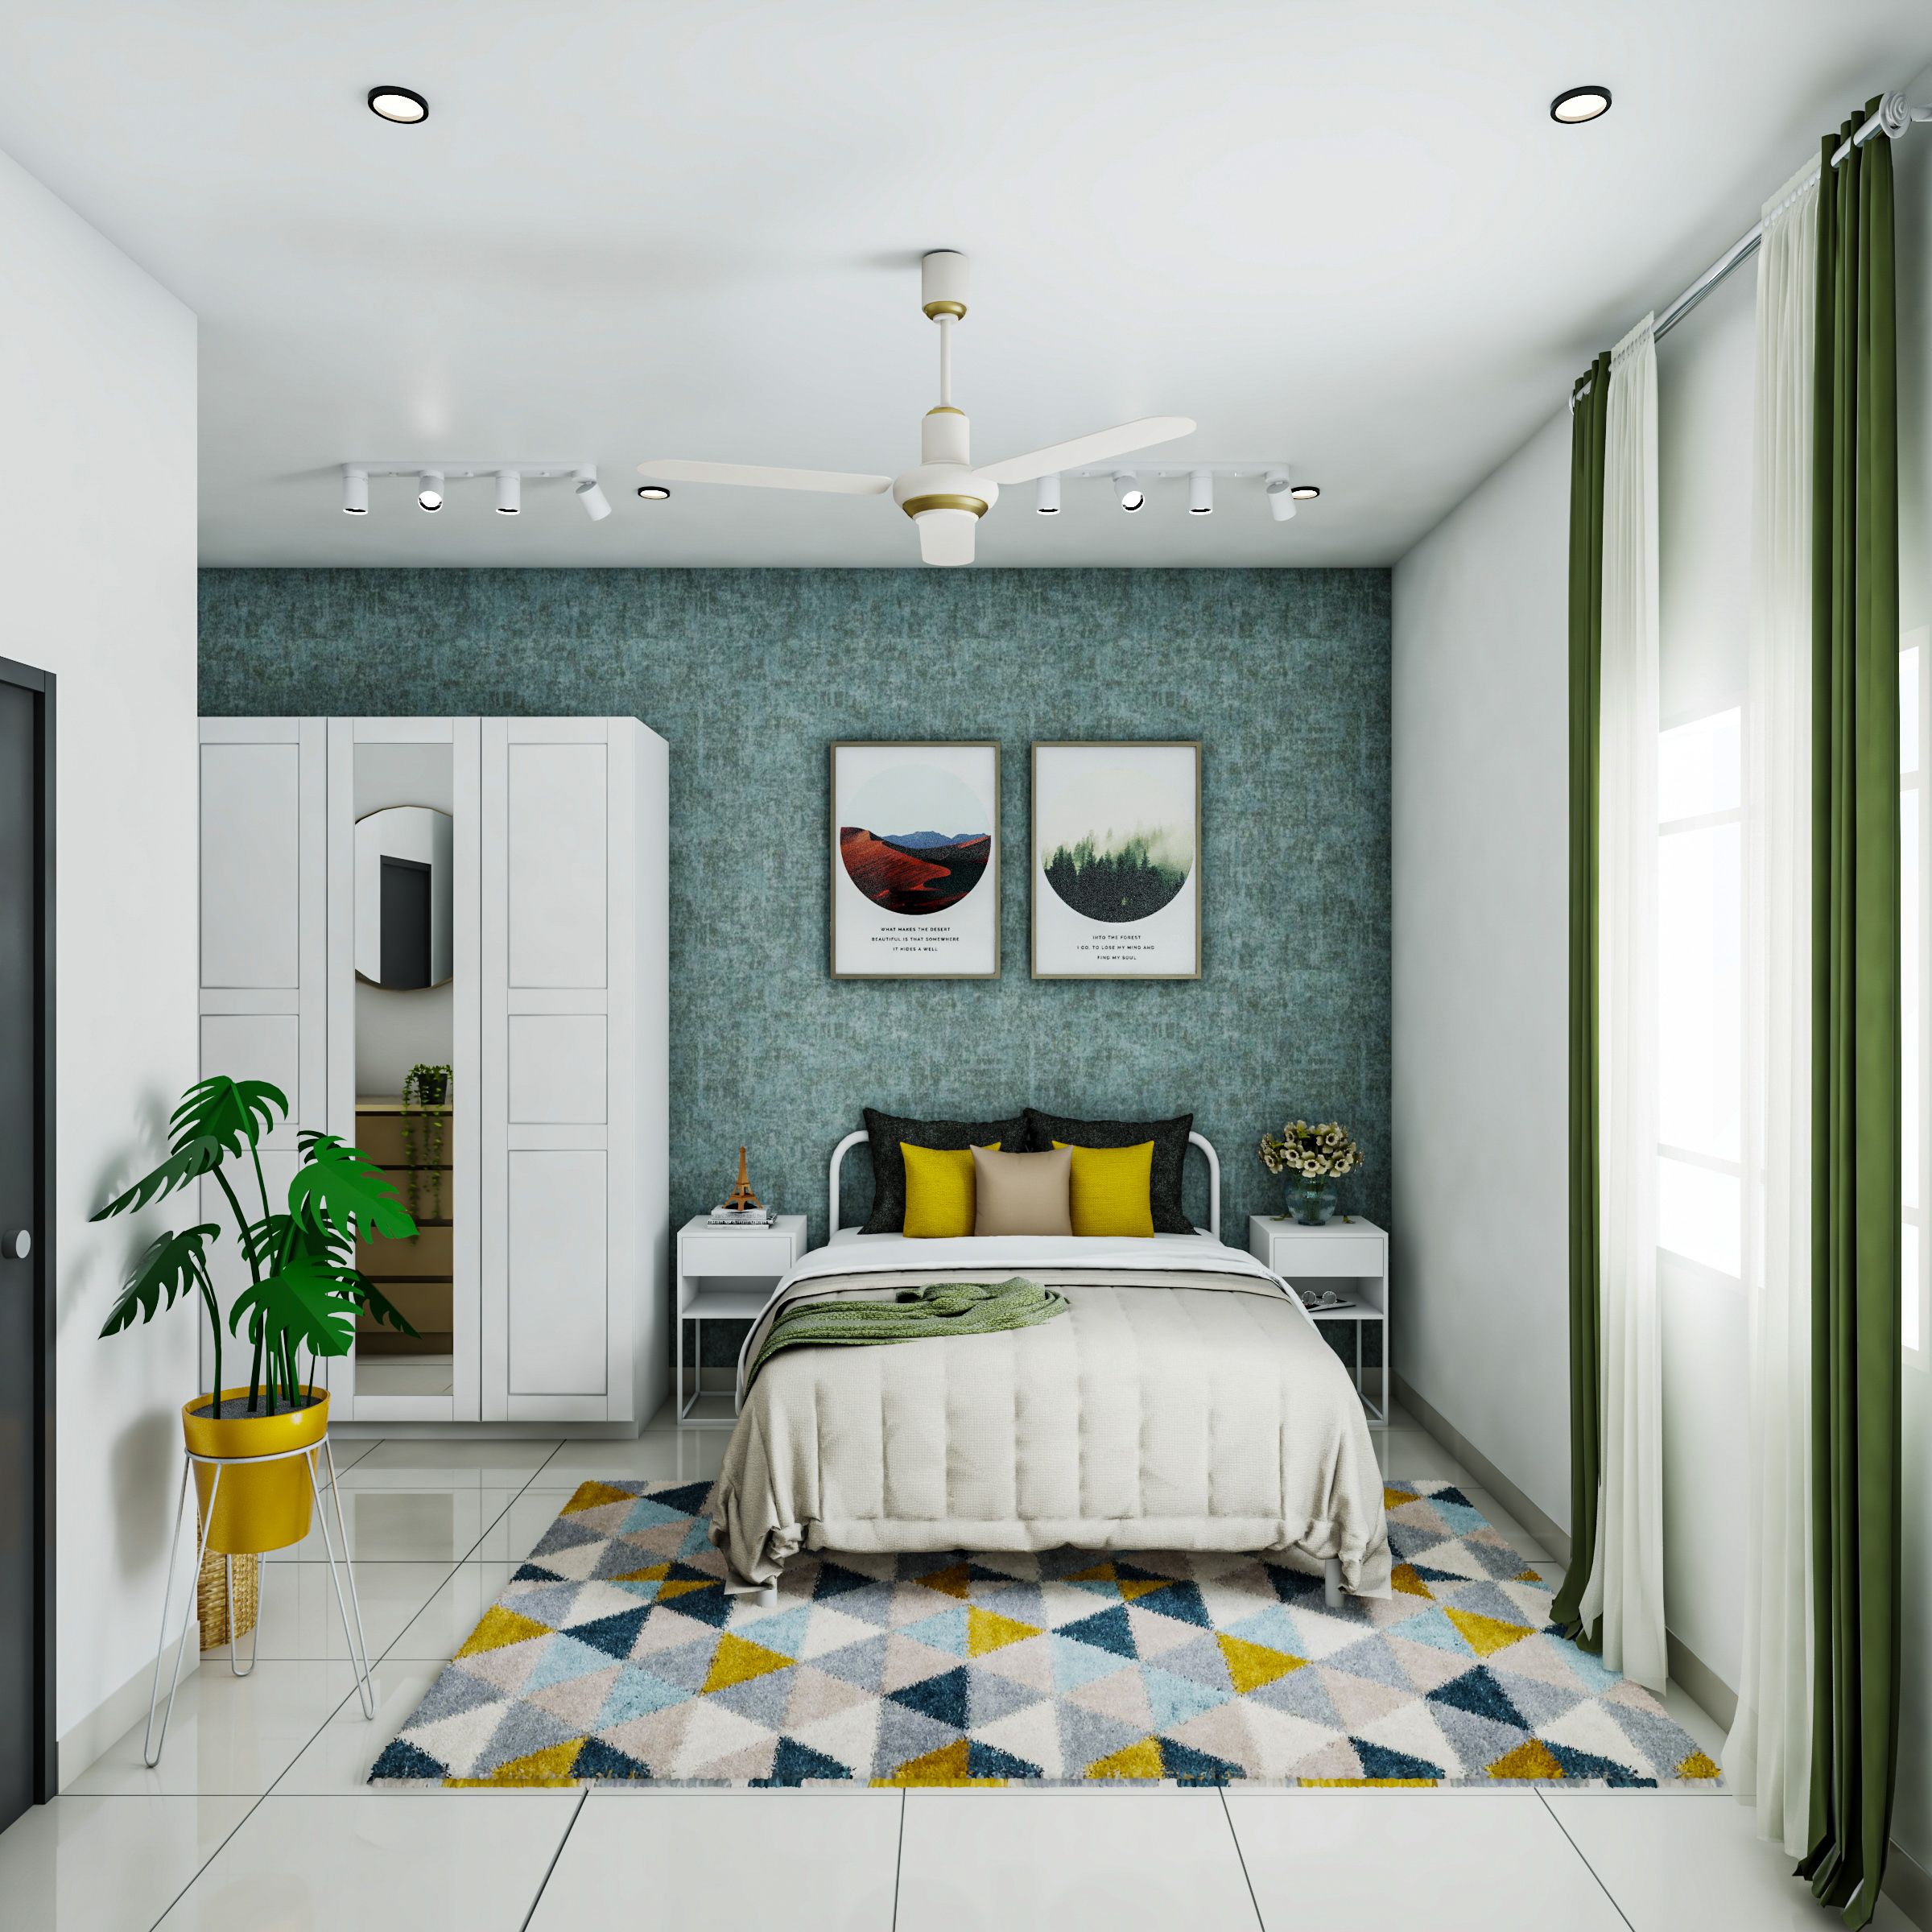 Modern Master Bedroom Design With Teal Accent Wall And Vibrant Rug